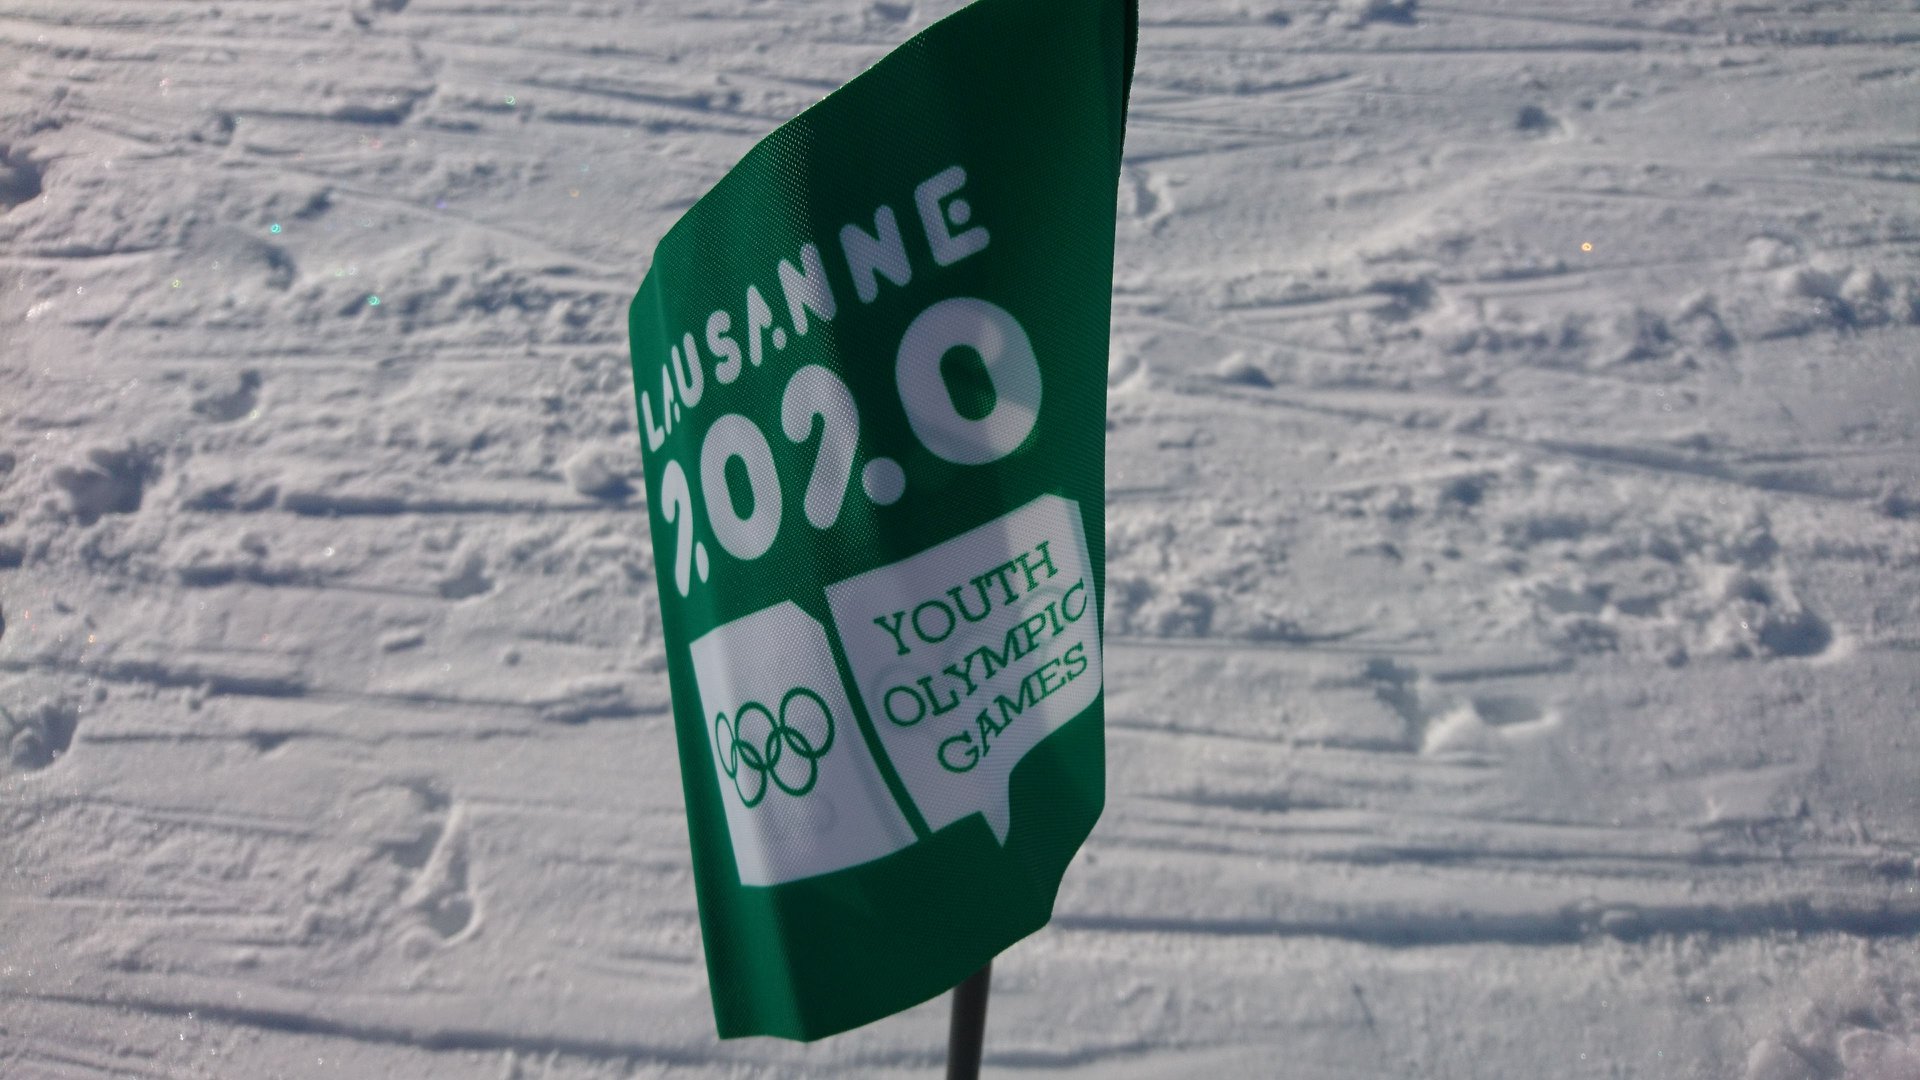 2020 Youth Olympic Games – Lausanne, Switzerland